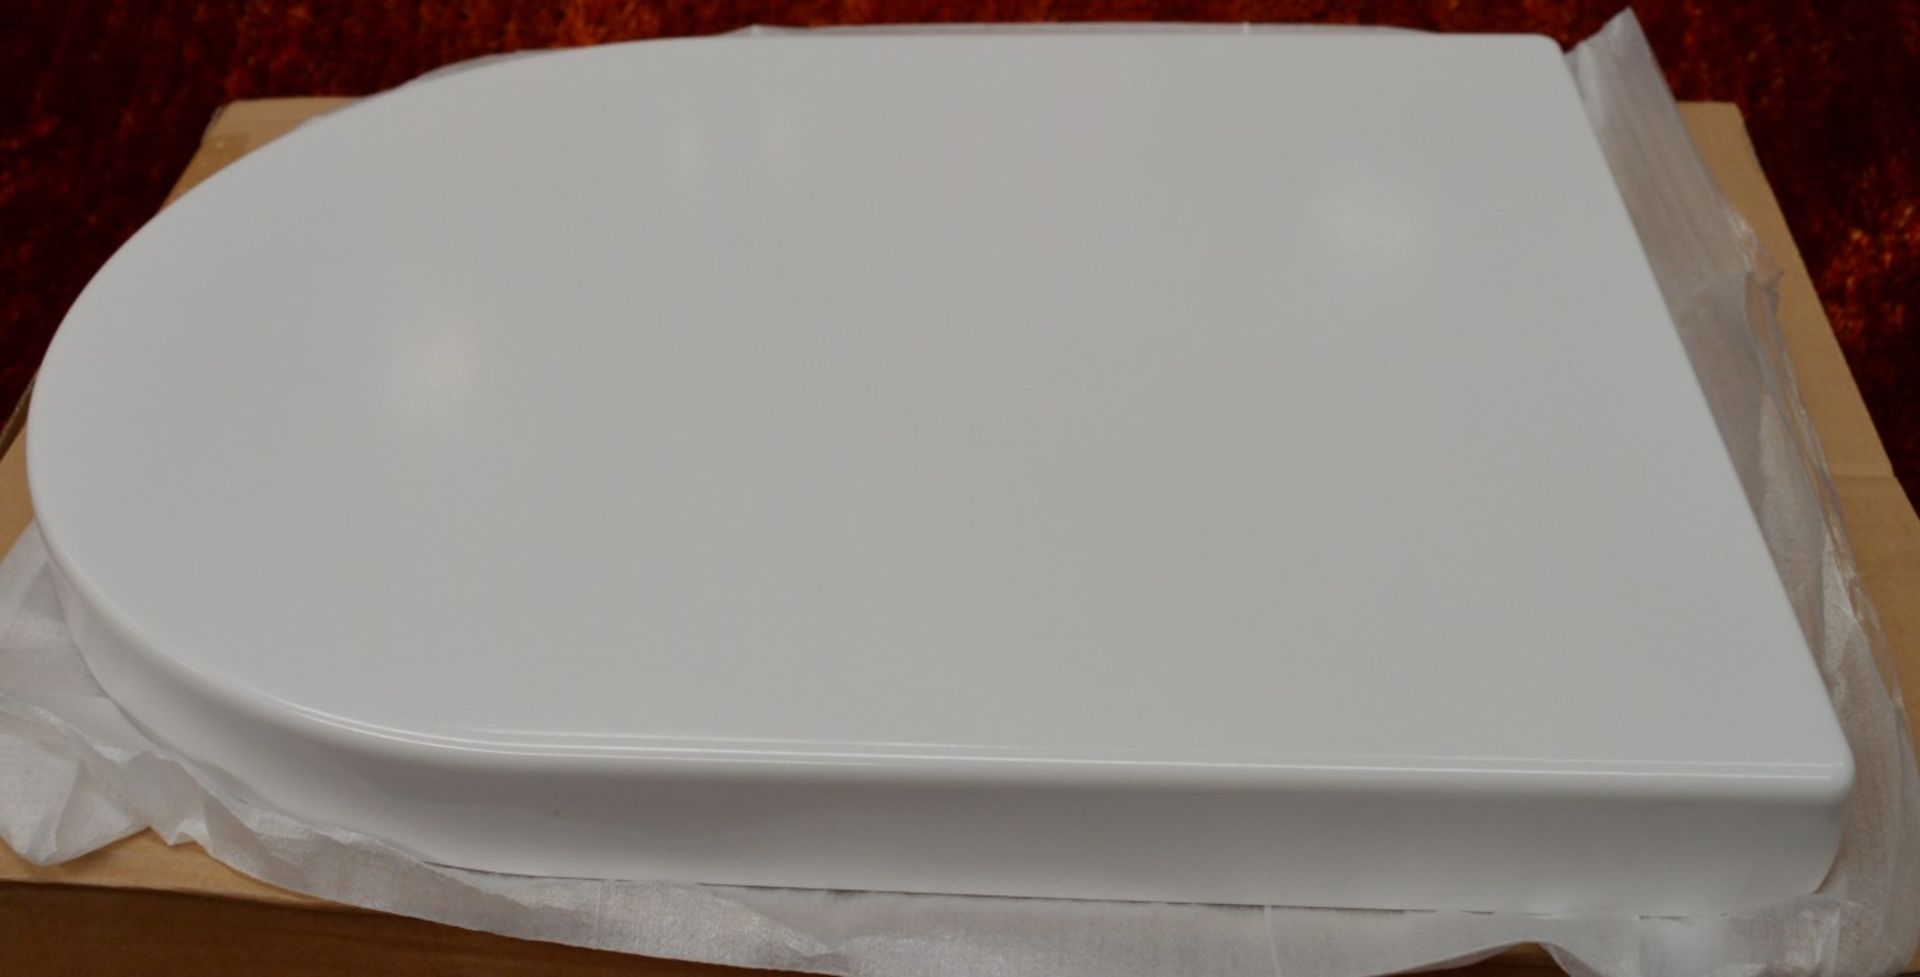 1 x Vogue Cosmos Modern White Soft Close Toilet Seat and Cover Top Fixing - Brand New Boxed - Image 5 of 8